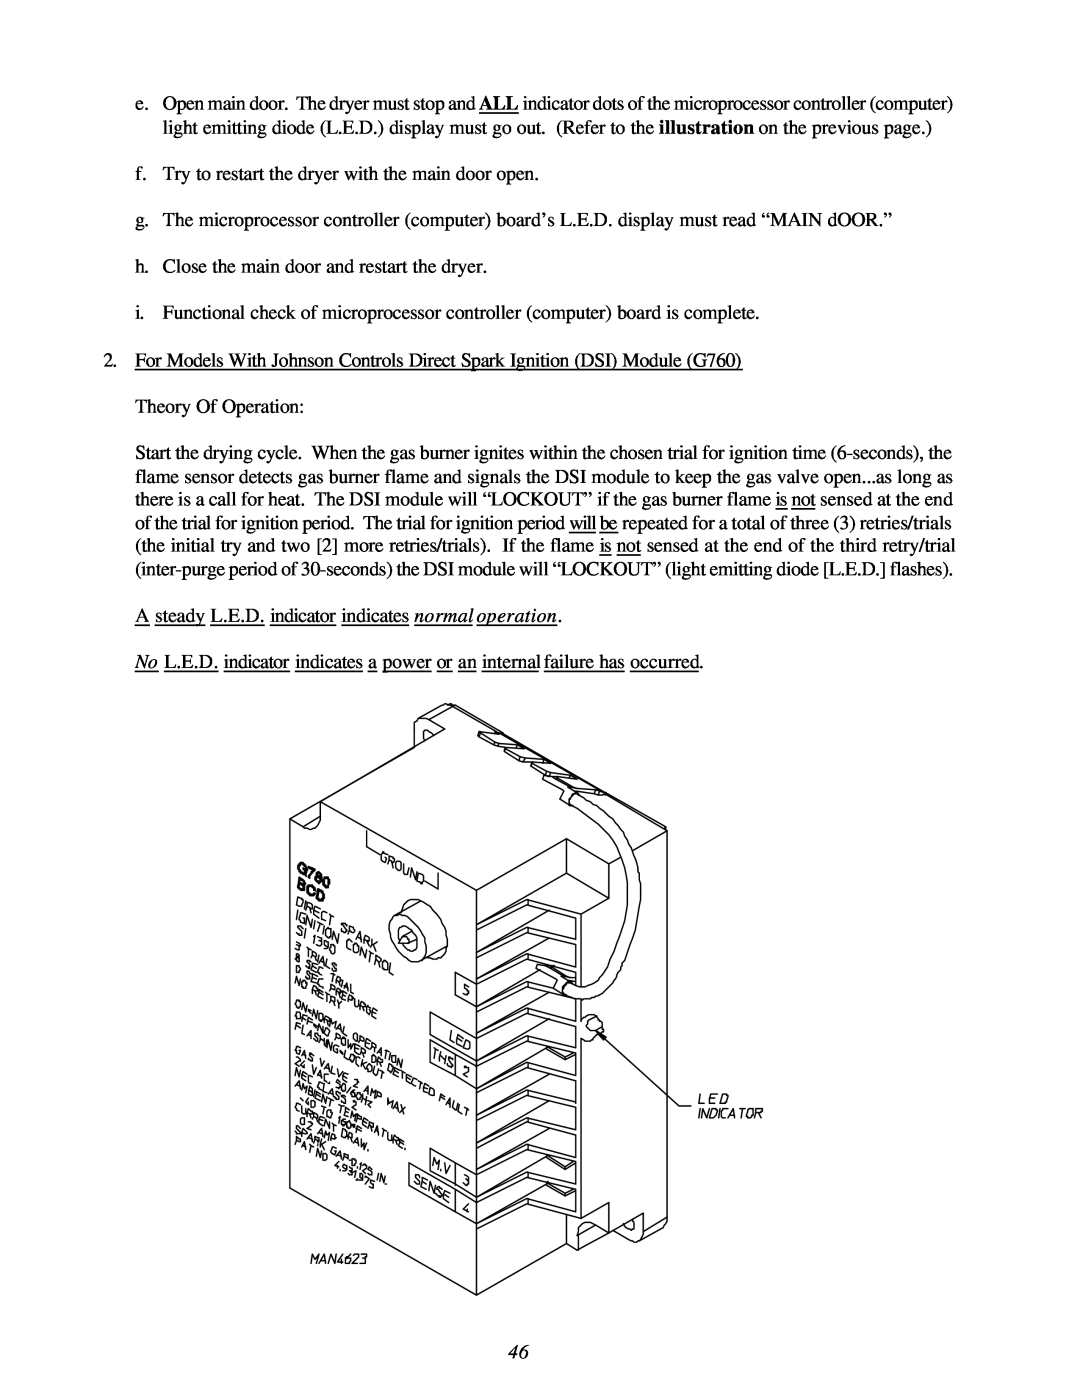 American Dryer Corp ML-122D installation manual f. Try to restart the dryer with the main door open 